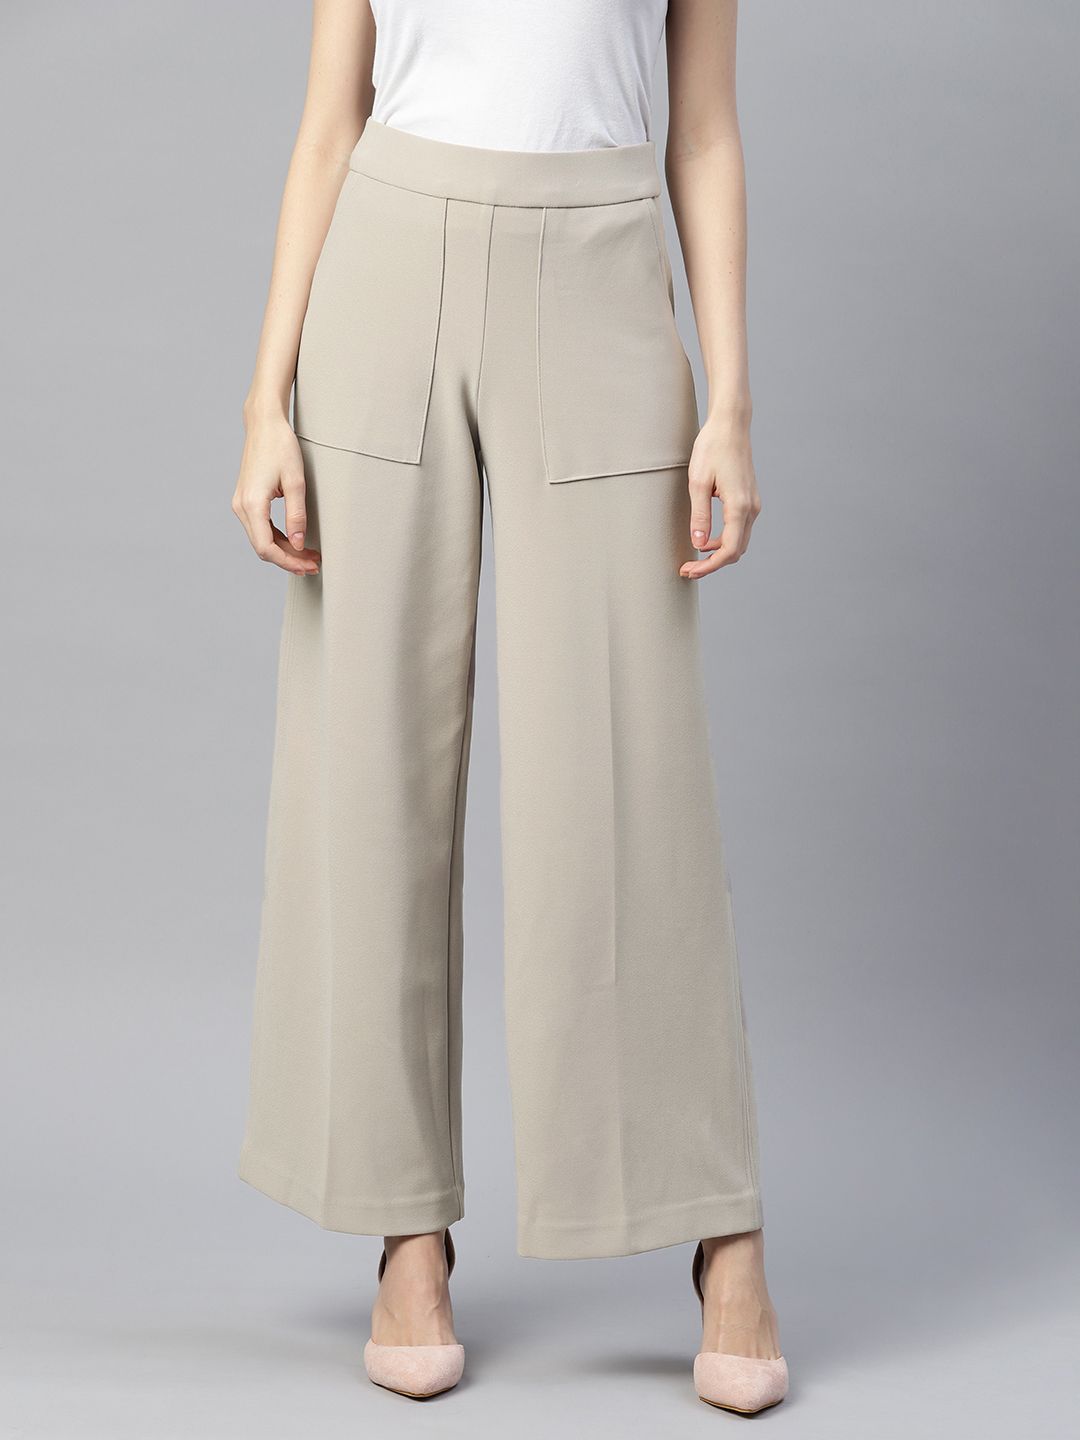 Marks & Spencer Women Beige High-Rise Trousers Price in India